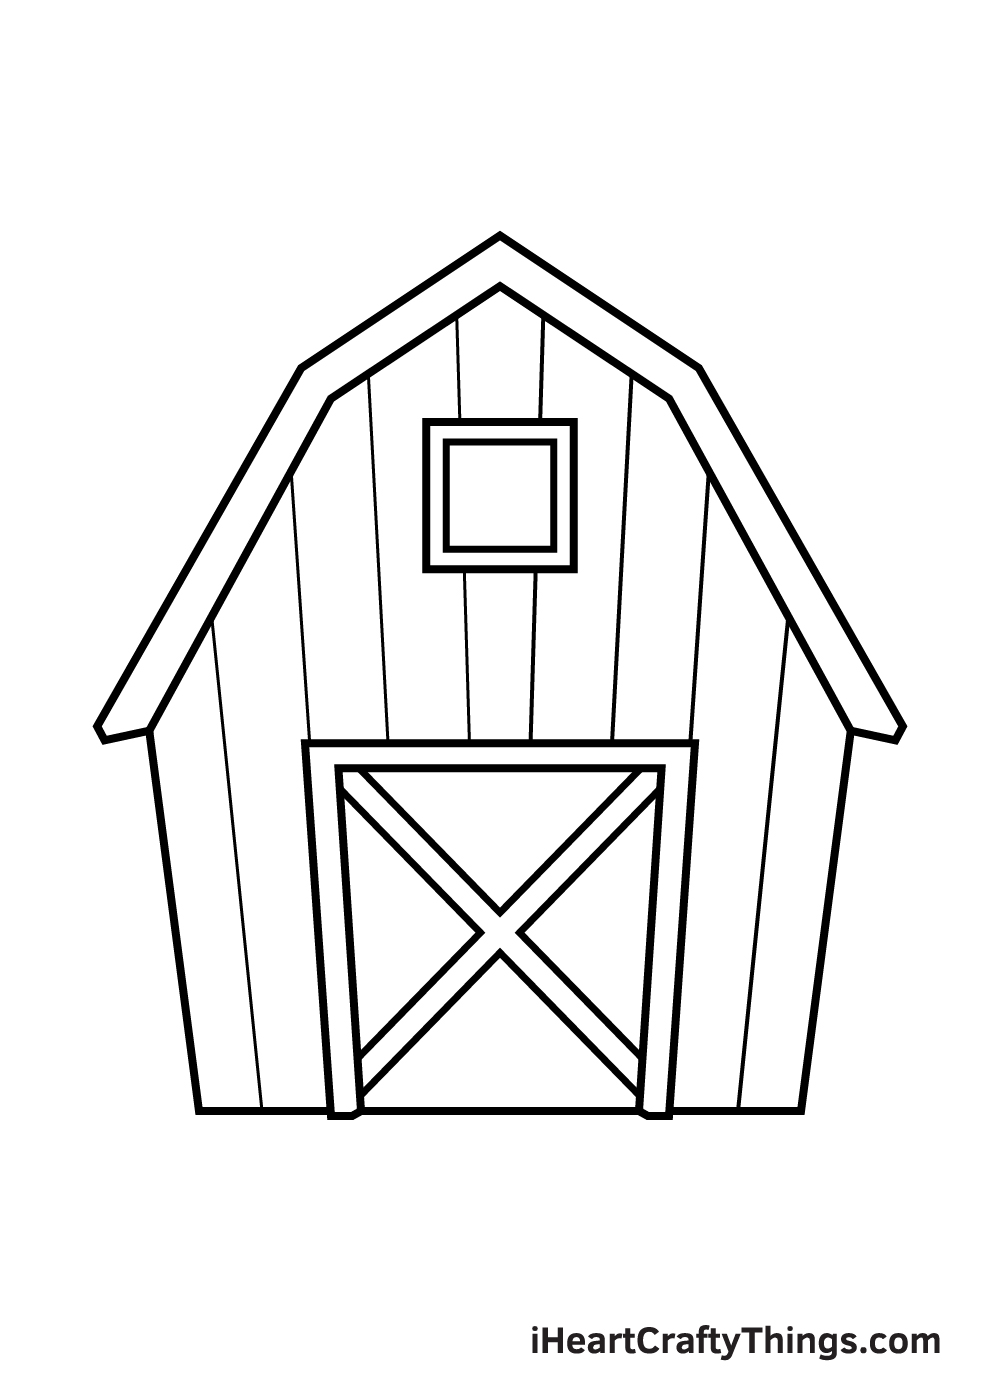 Draw A Barn Using One Point Perspective | Emily Armstrong | Skillshare